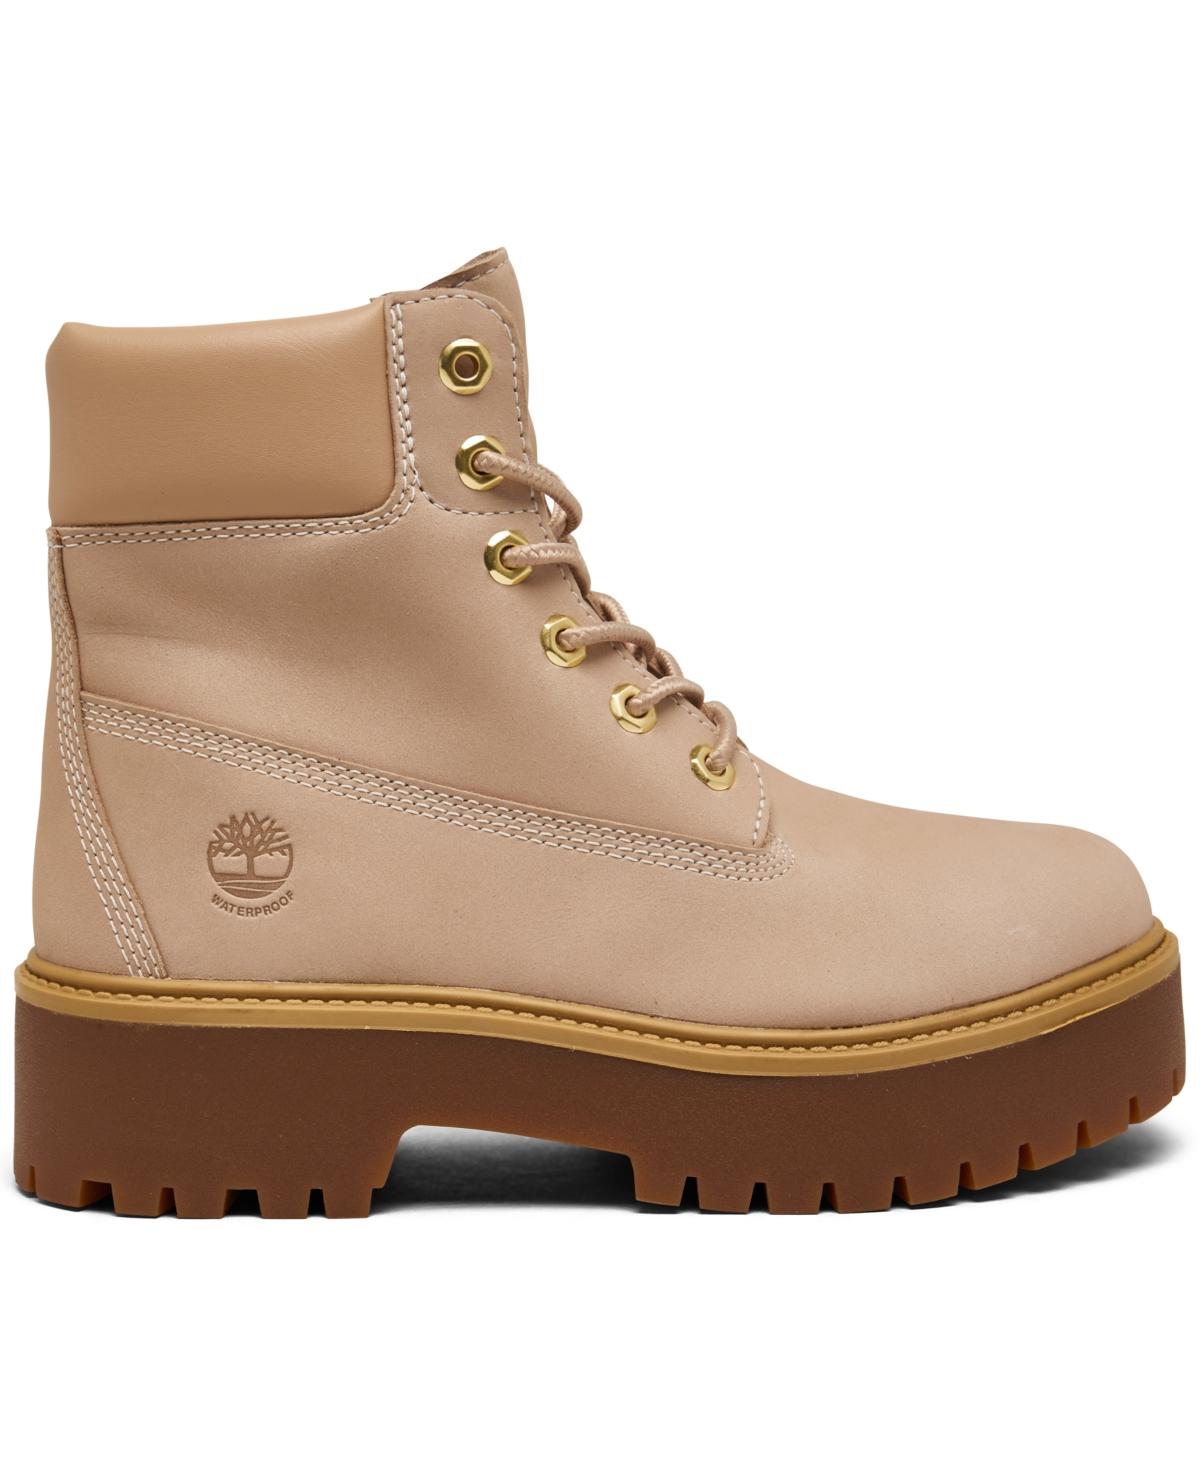 Timberland Stone Street 6" Water Resistant Platform Boots From Finish Line  in Natural | Lyst